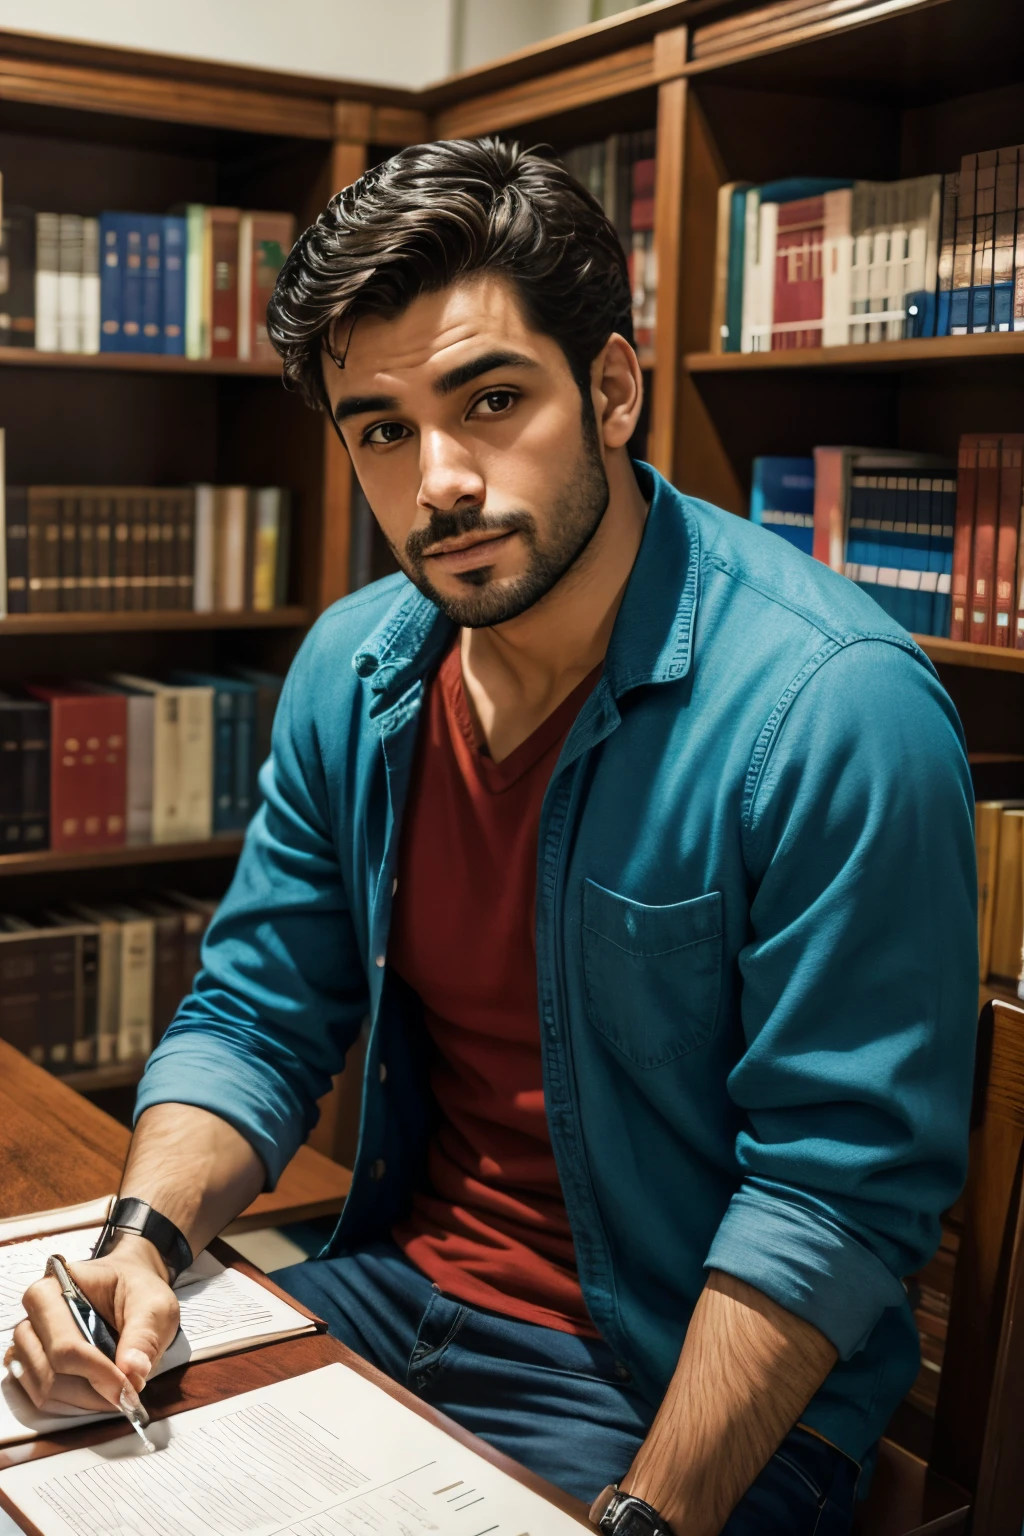 Photo of a man in a library